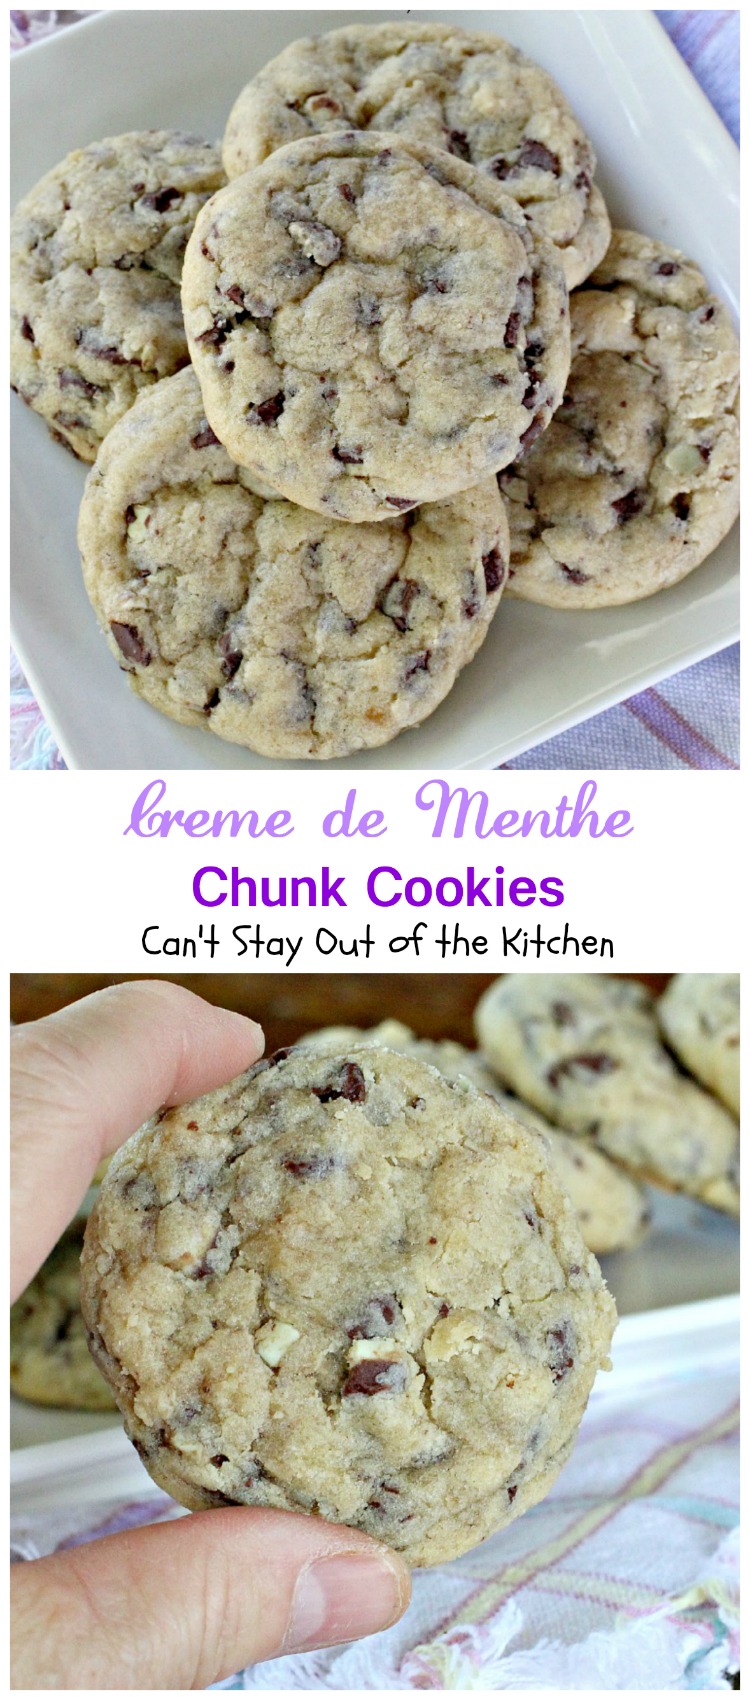 Creme de Menthe Chunk Cookies | Can't Stay Out of the KitchenCreme de Menthe Chunk Cookies | Can't Stay Out of the Kitchen